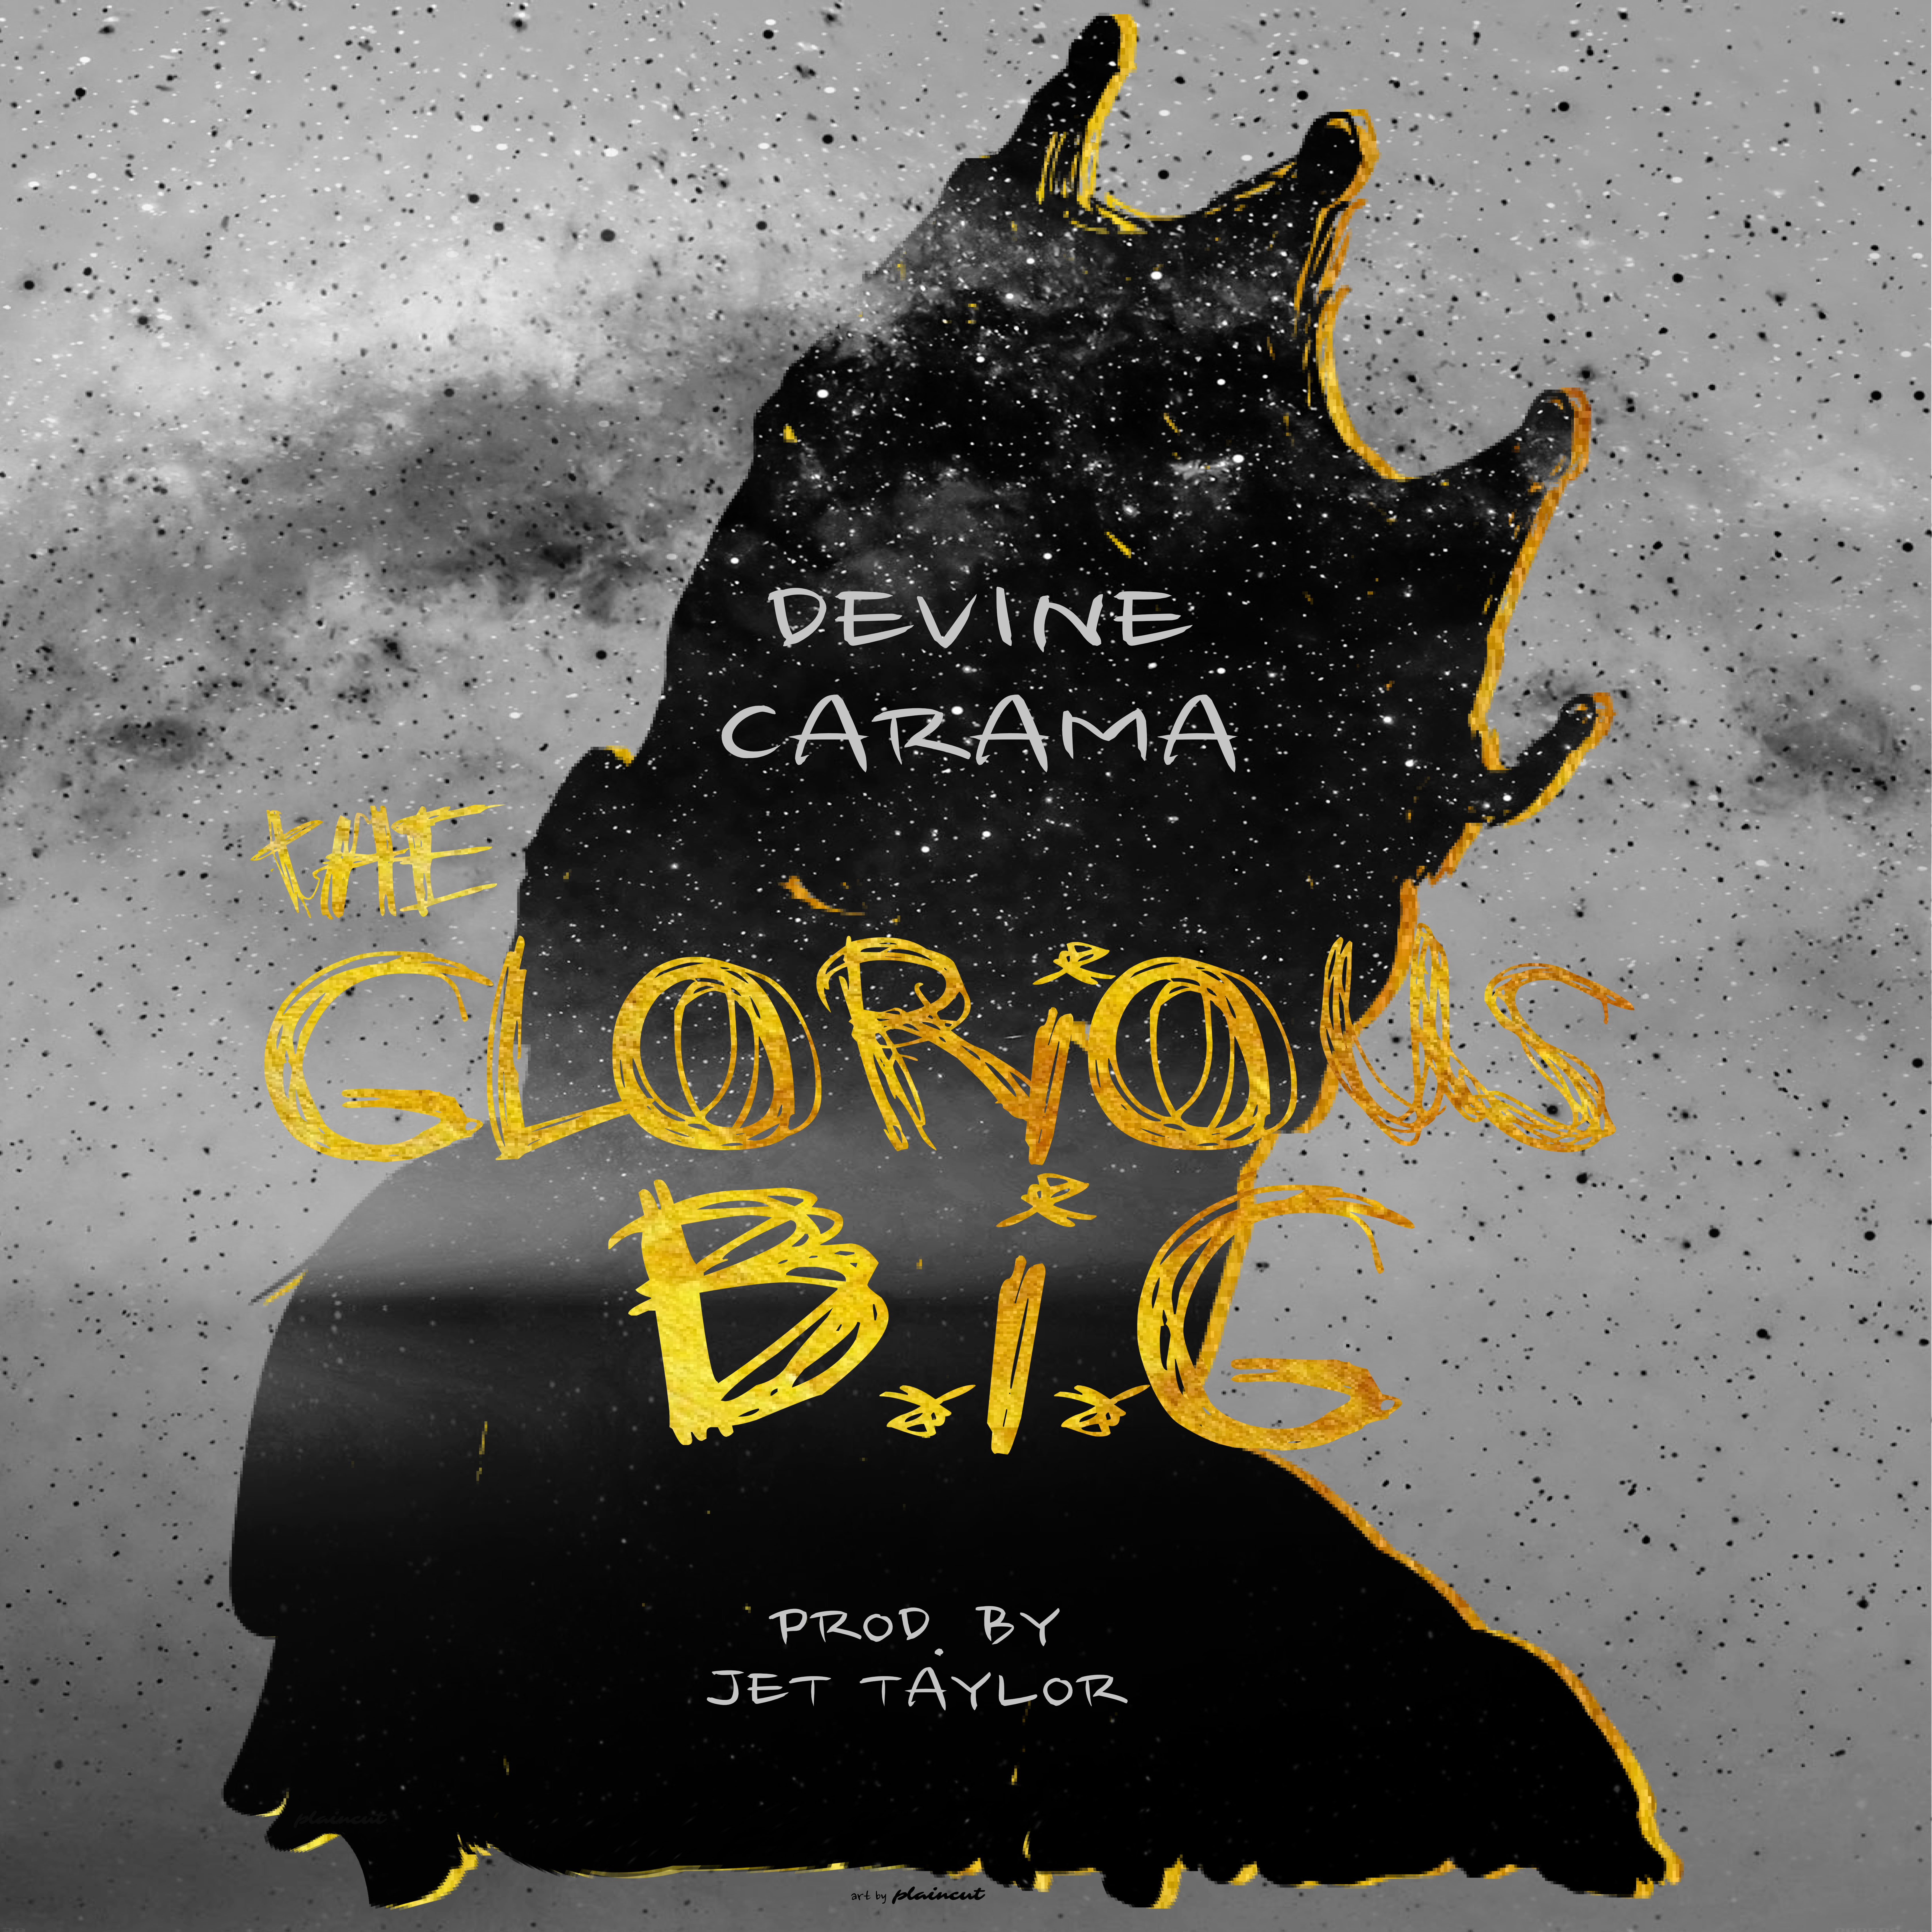 Devine Carama - Smoke Signal to Oddisee (produced by Jet Taylor) [audio]